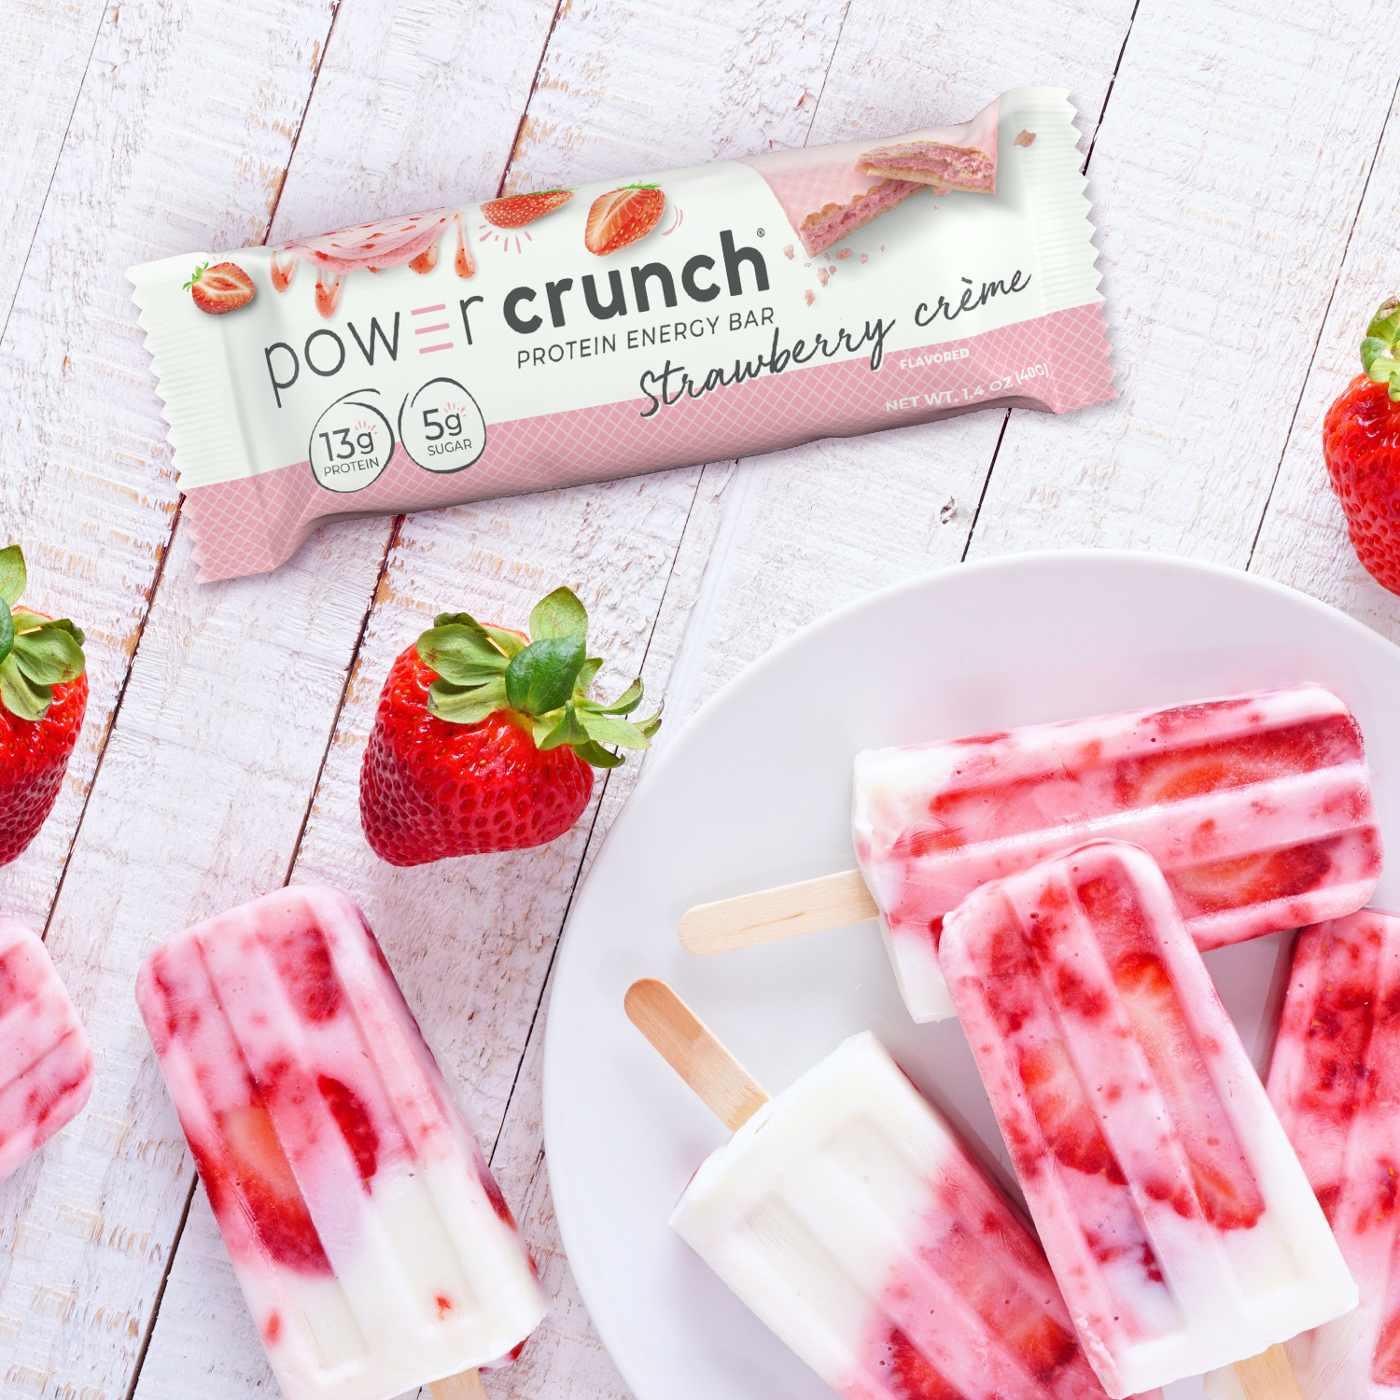 Power Crunch 13g Protein Energy Bar - Strawberry Crème; image 3 of 3